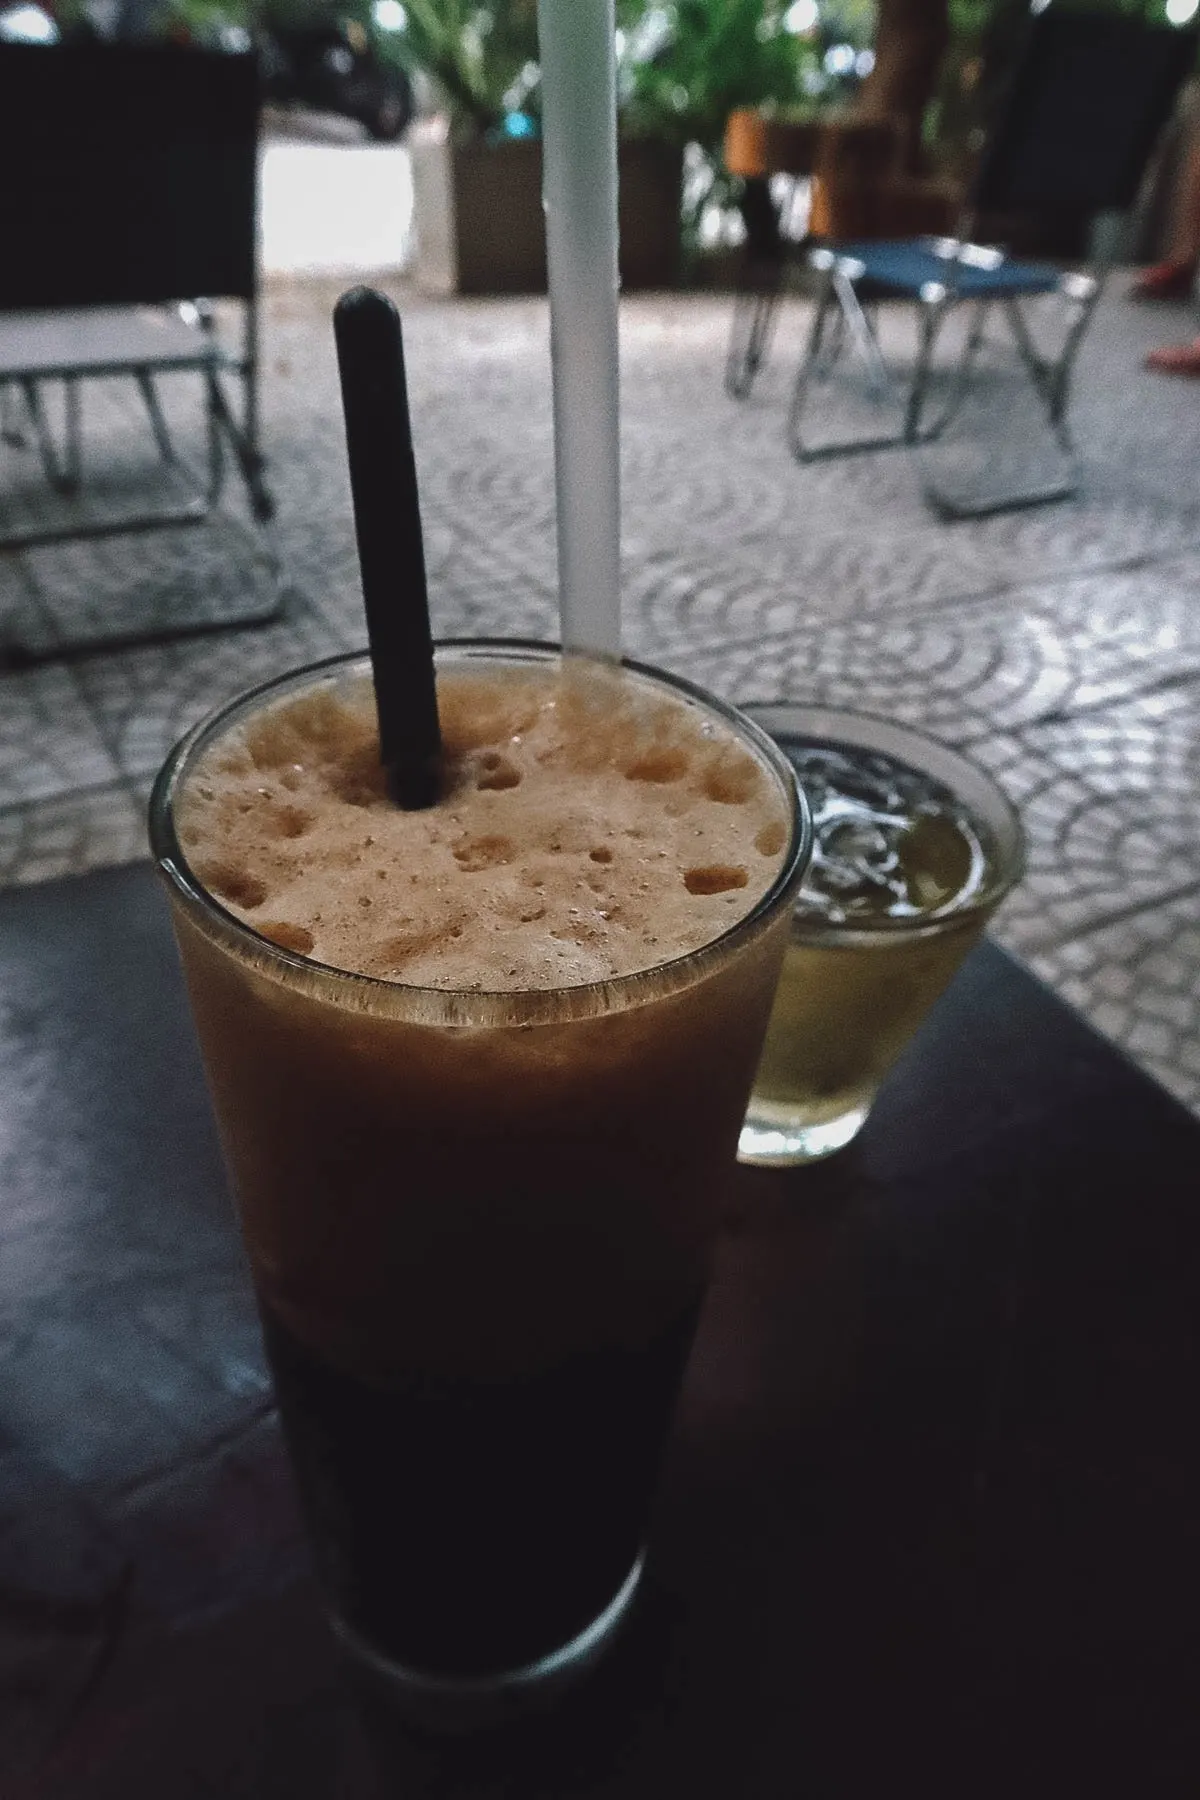 Iced black coffee at a cafe in Danang, Vietnam